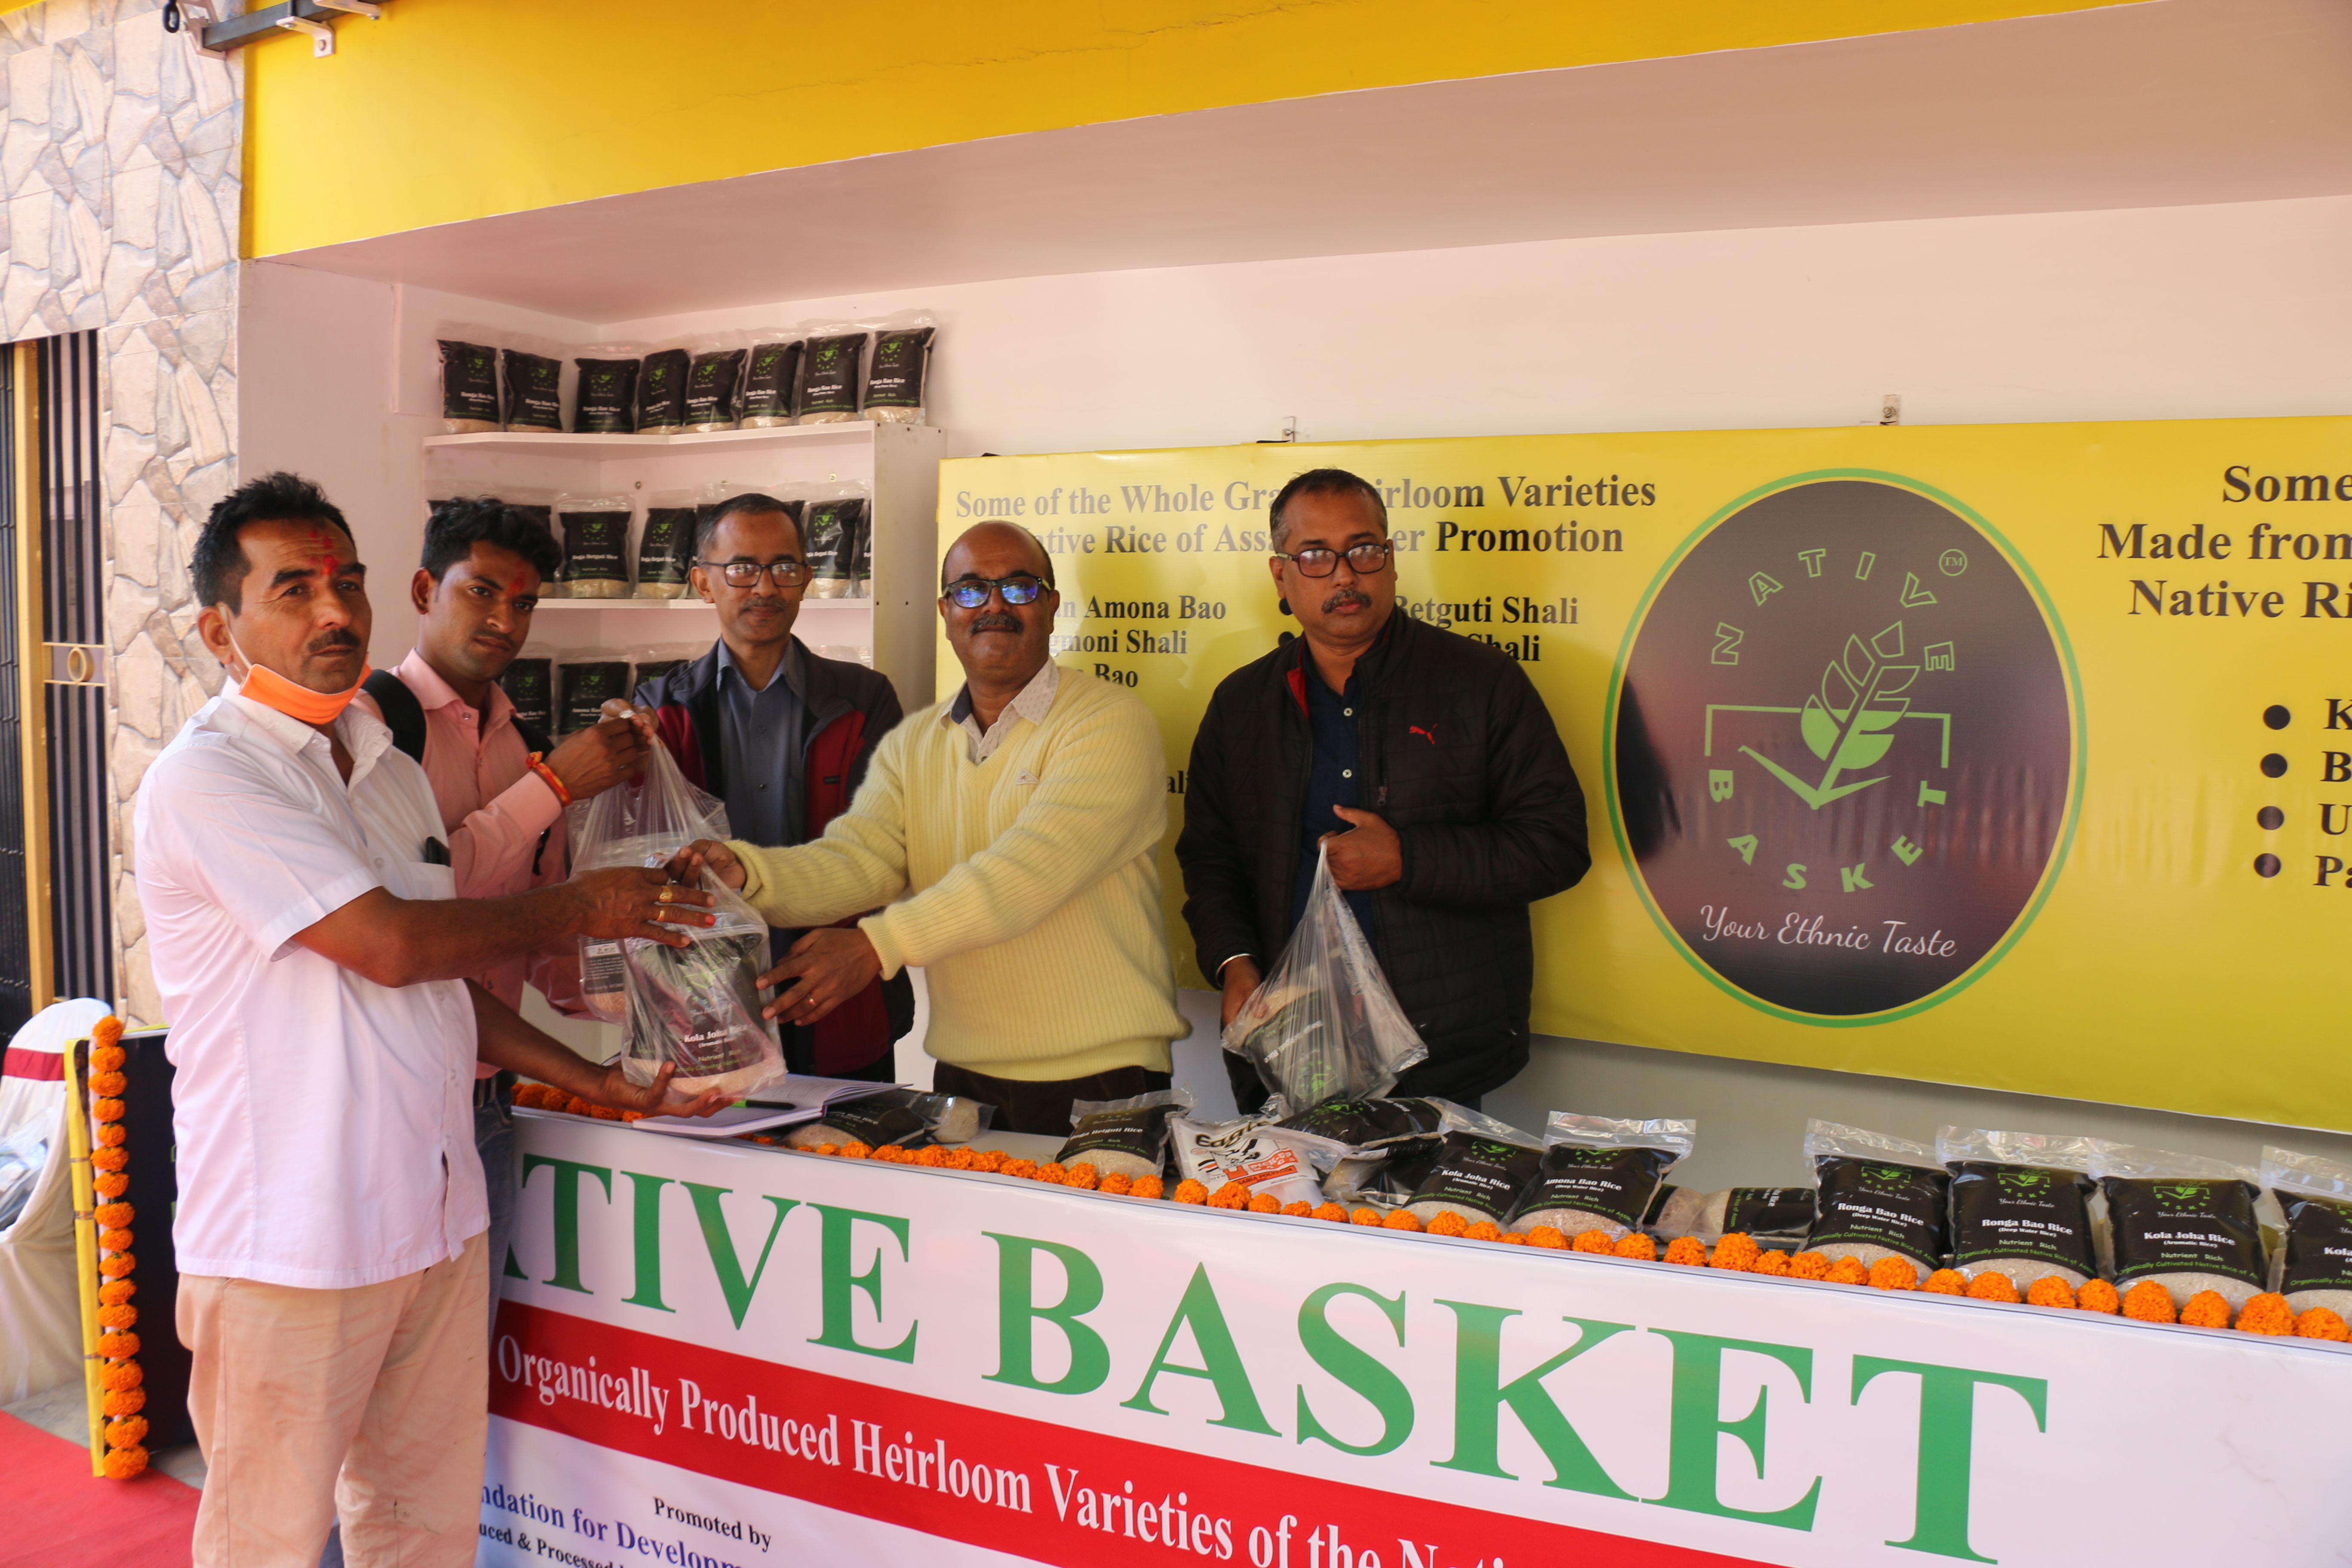 The first customer at Native Basket outlet by Guwahati-based NGO Foundation for Development Integration (FDI), which has identified 24 heritage rice varieties for revival. Courtesy: Sonal Dsouza